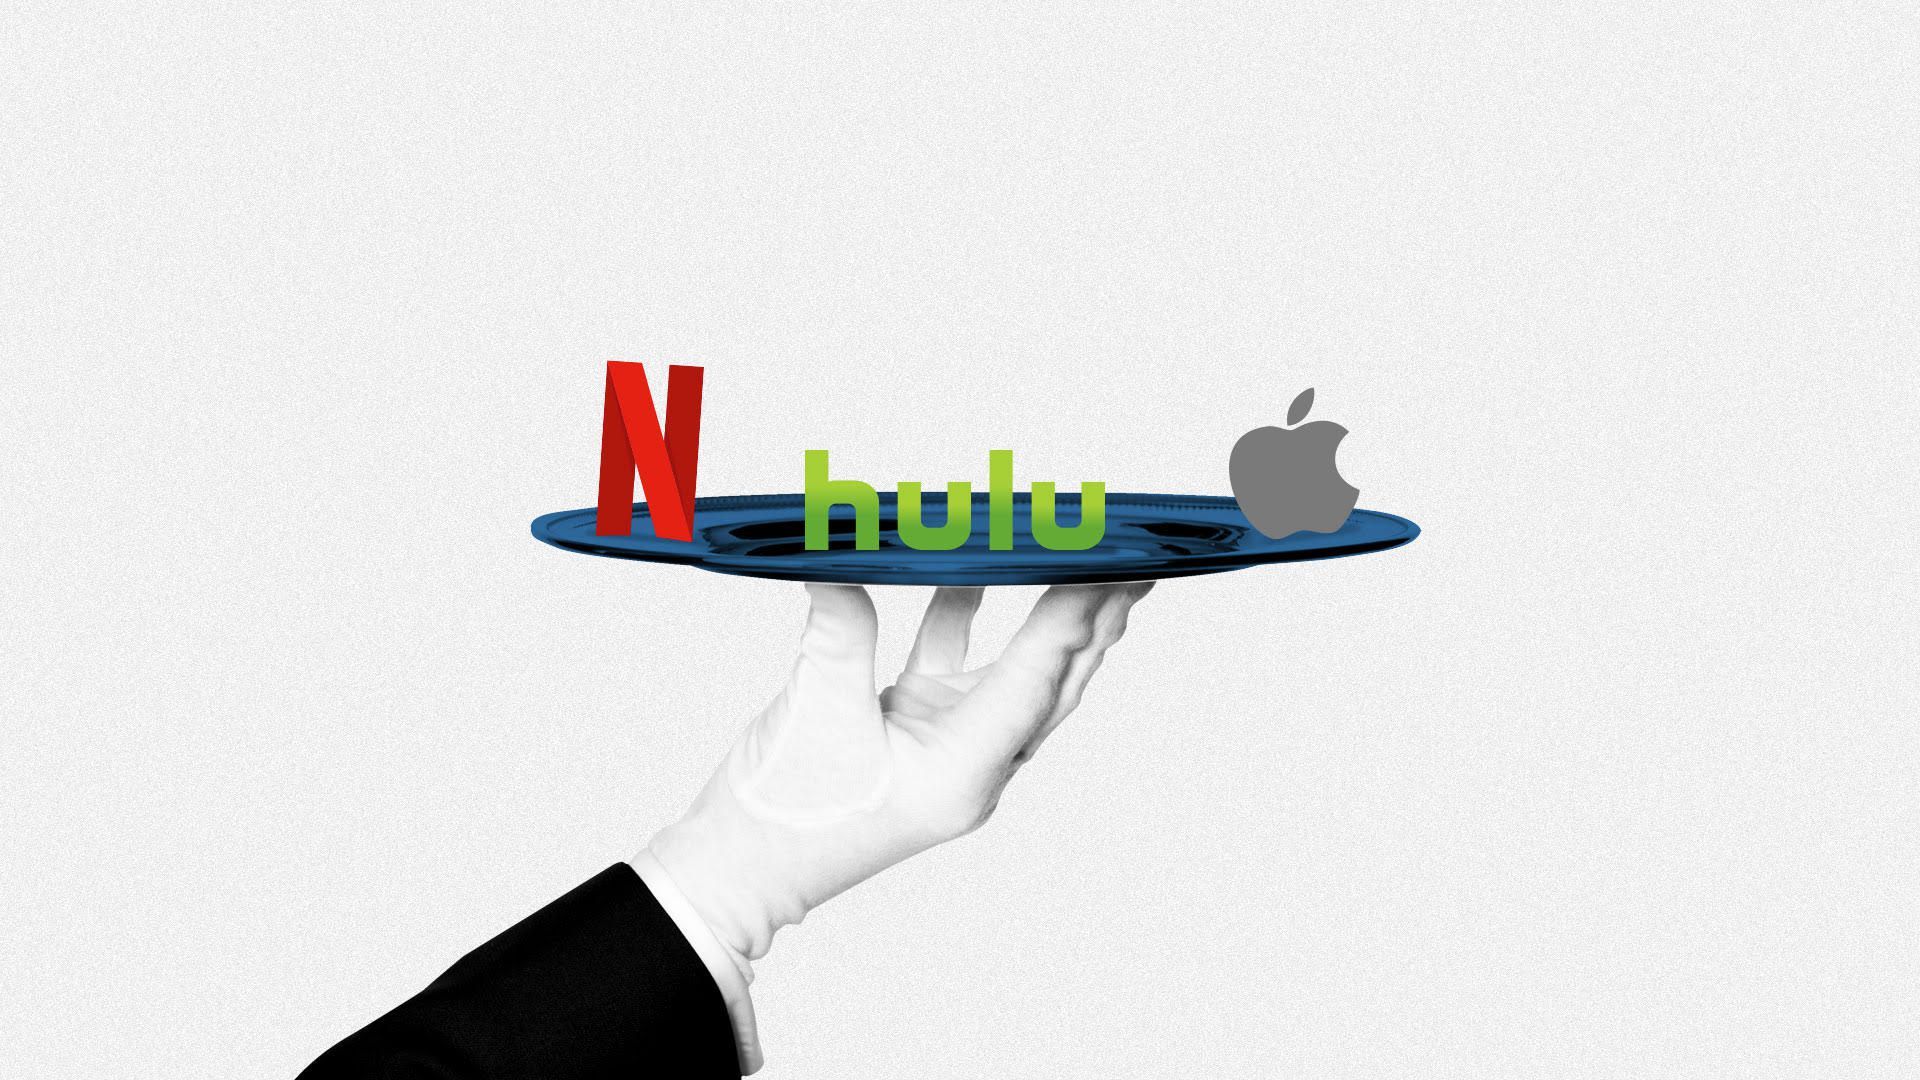 Illustration showing logos of streaming services like Netflix and Hulu served up on a platter